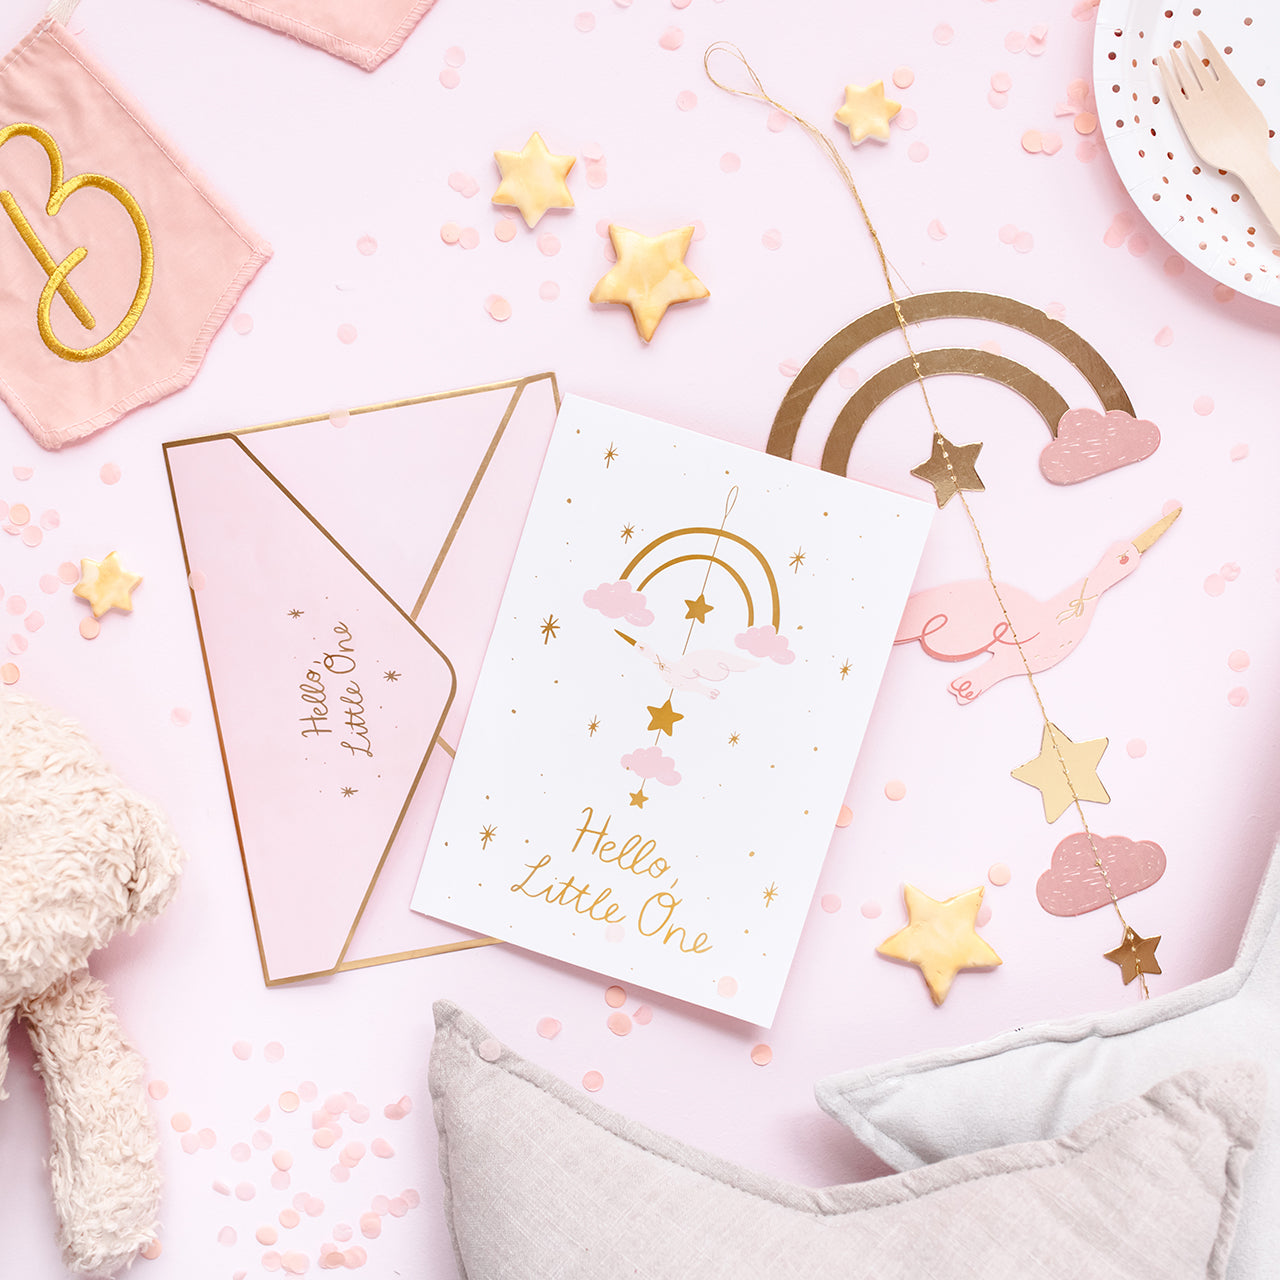 Partydeco: A card for the birth of a child with a stork rose pendant